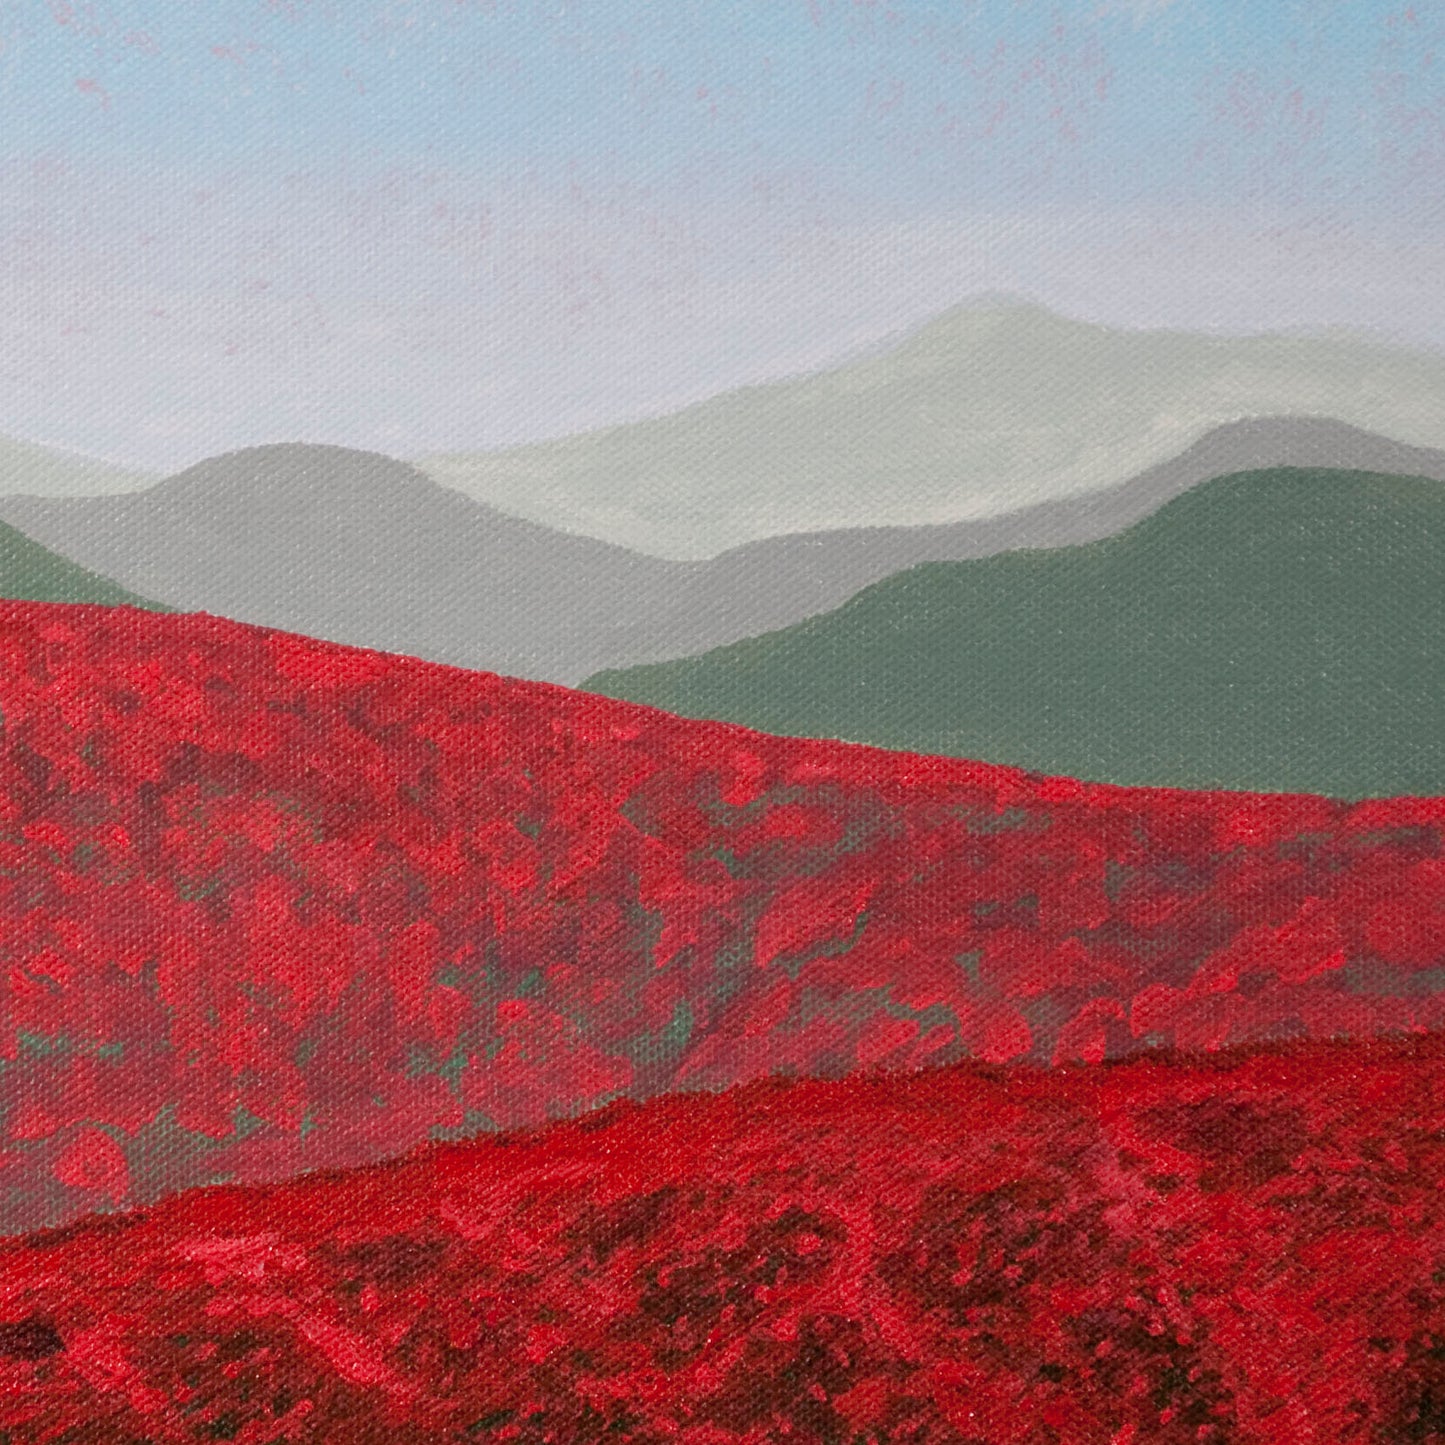 Original semiabstract landscape painting of red fields with an astronaut in white space suit with greenish grey hills in the beyond, zoomed in detail of hills and bluey pink skies. 